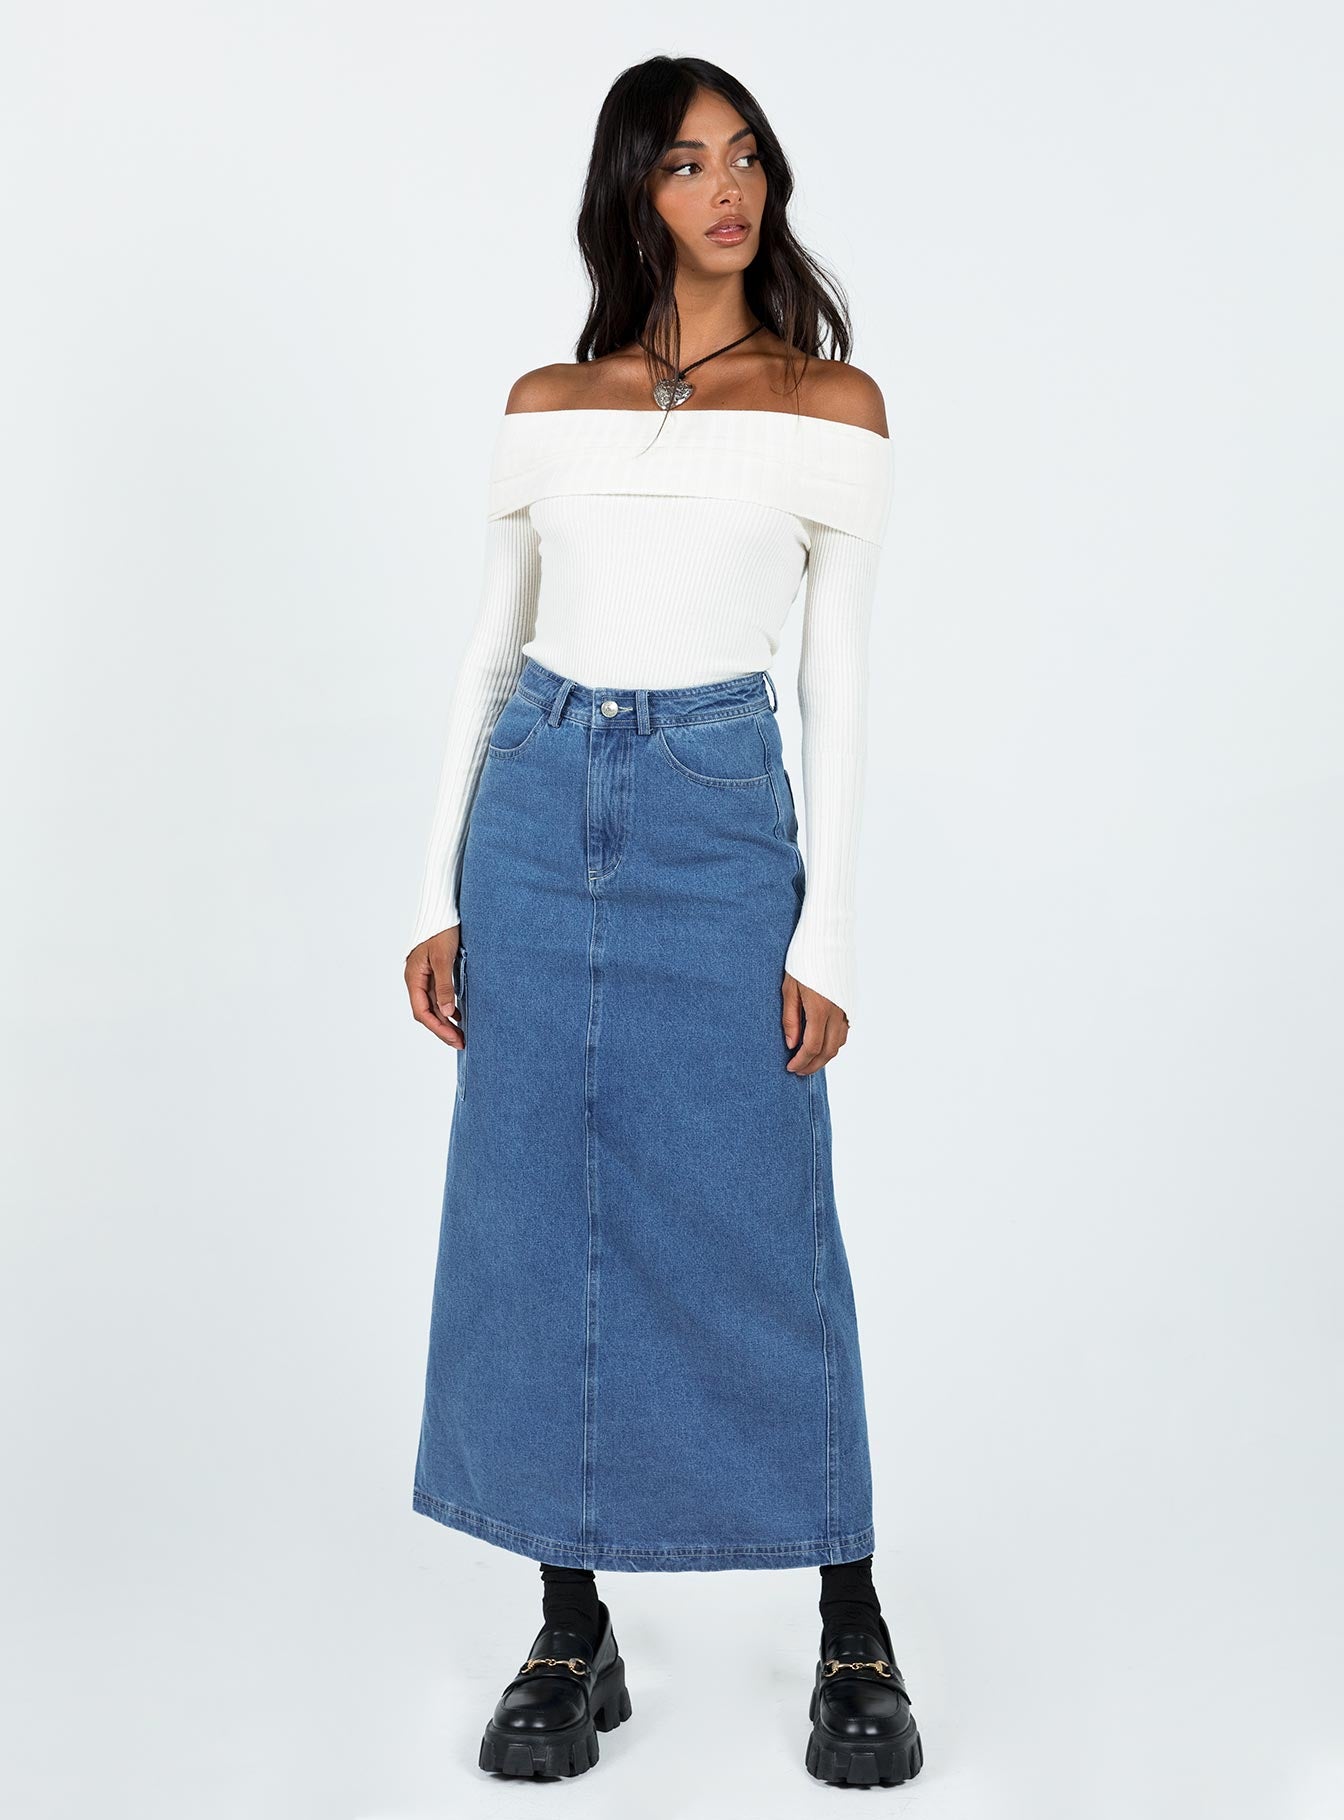 The Denim Maxi Skirt Trend – How To Wear It - THE JEANS BLOG